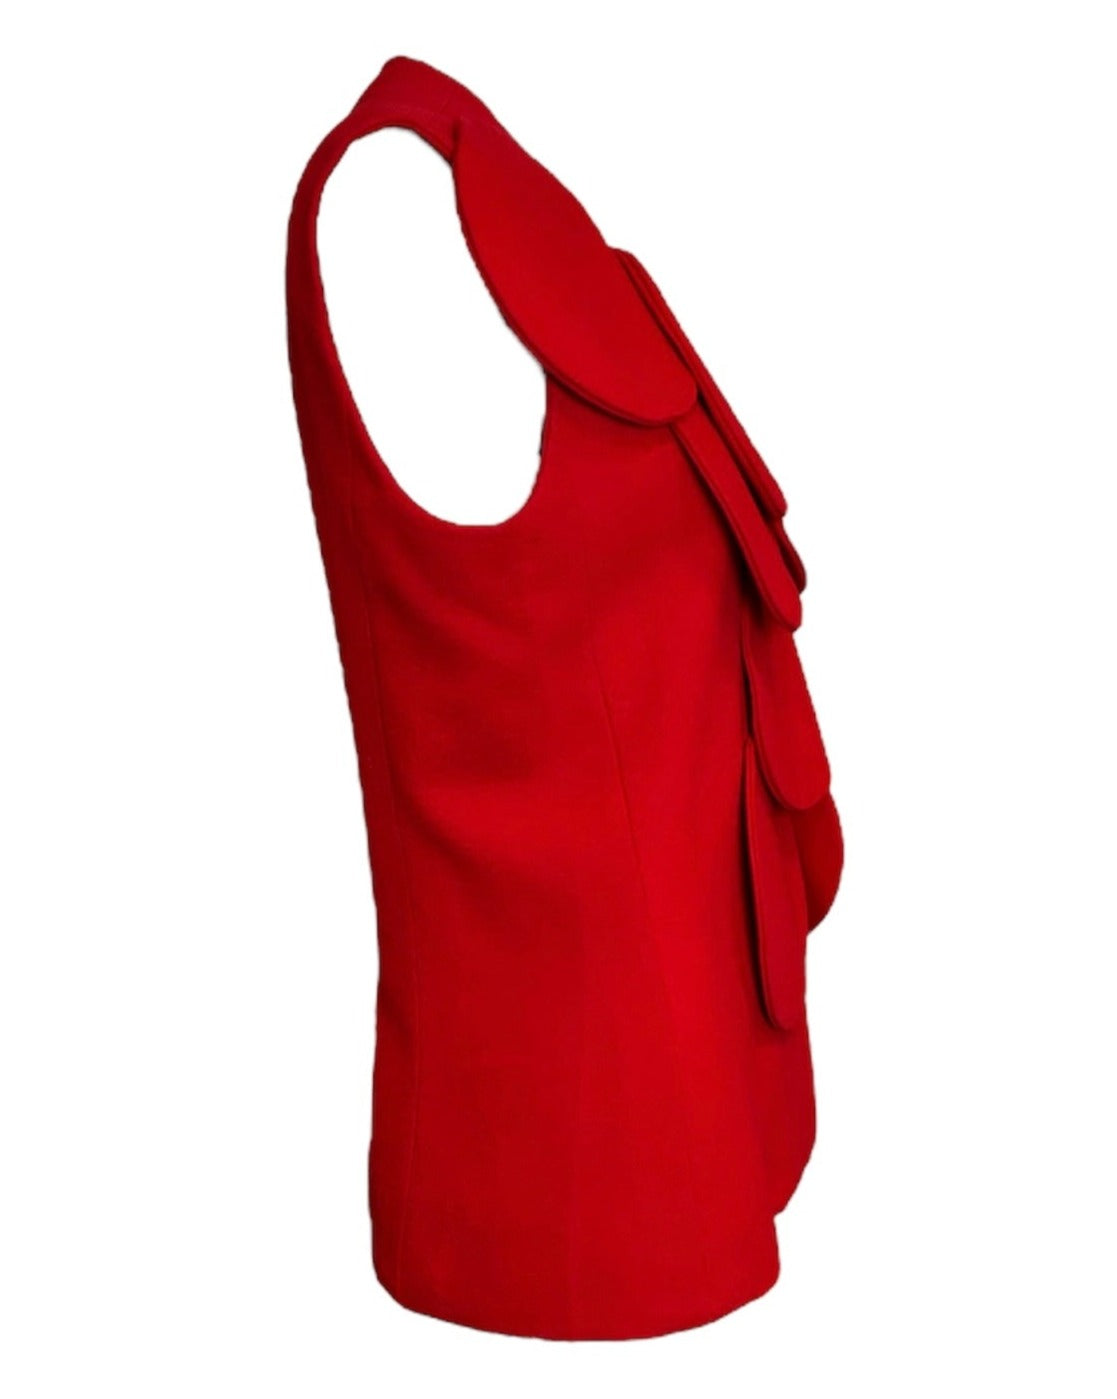 Pierre Cardin Couture Red Bubble Sleeveless JacketSIDE PHOTO 2 OF 5